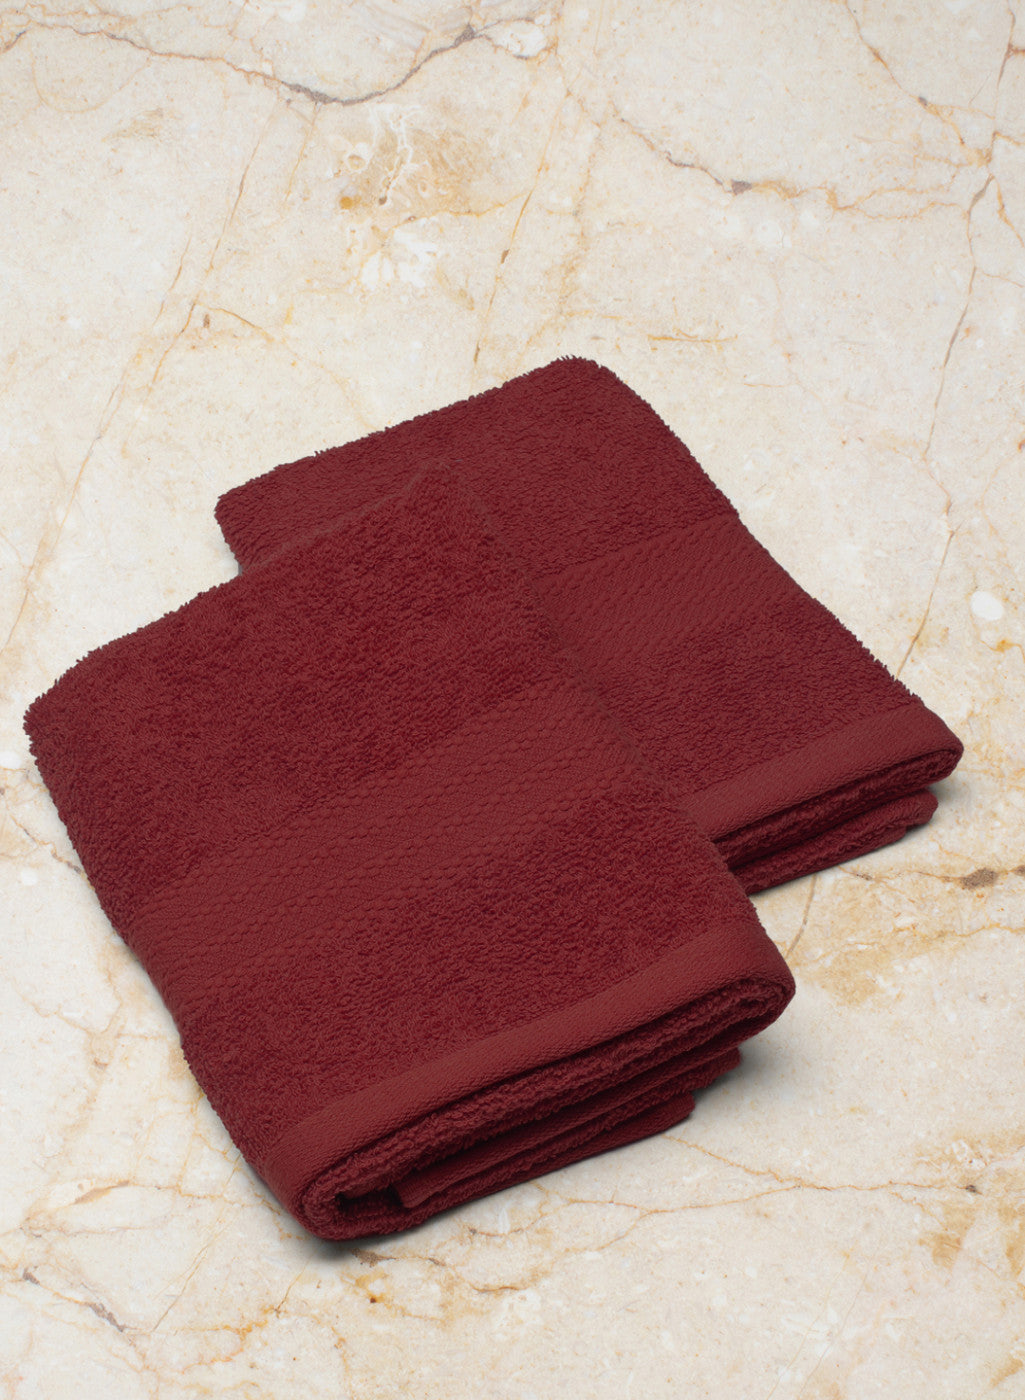 Maroon Cotton 400 GSM Hand Towels (Pack of 2)